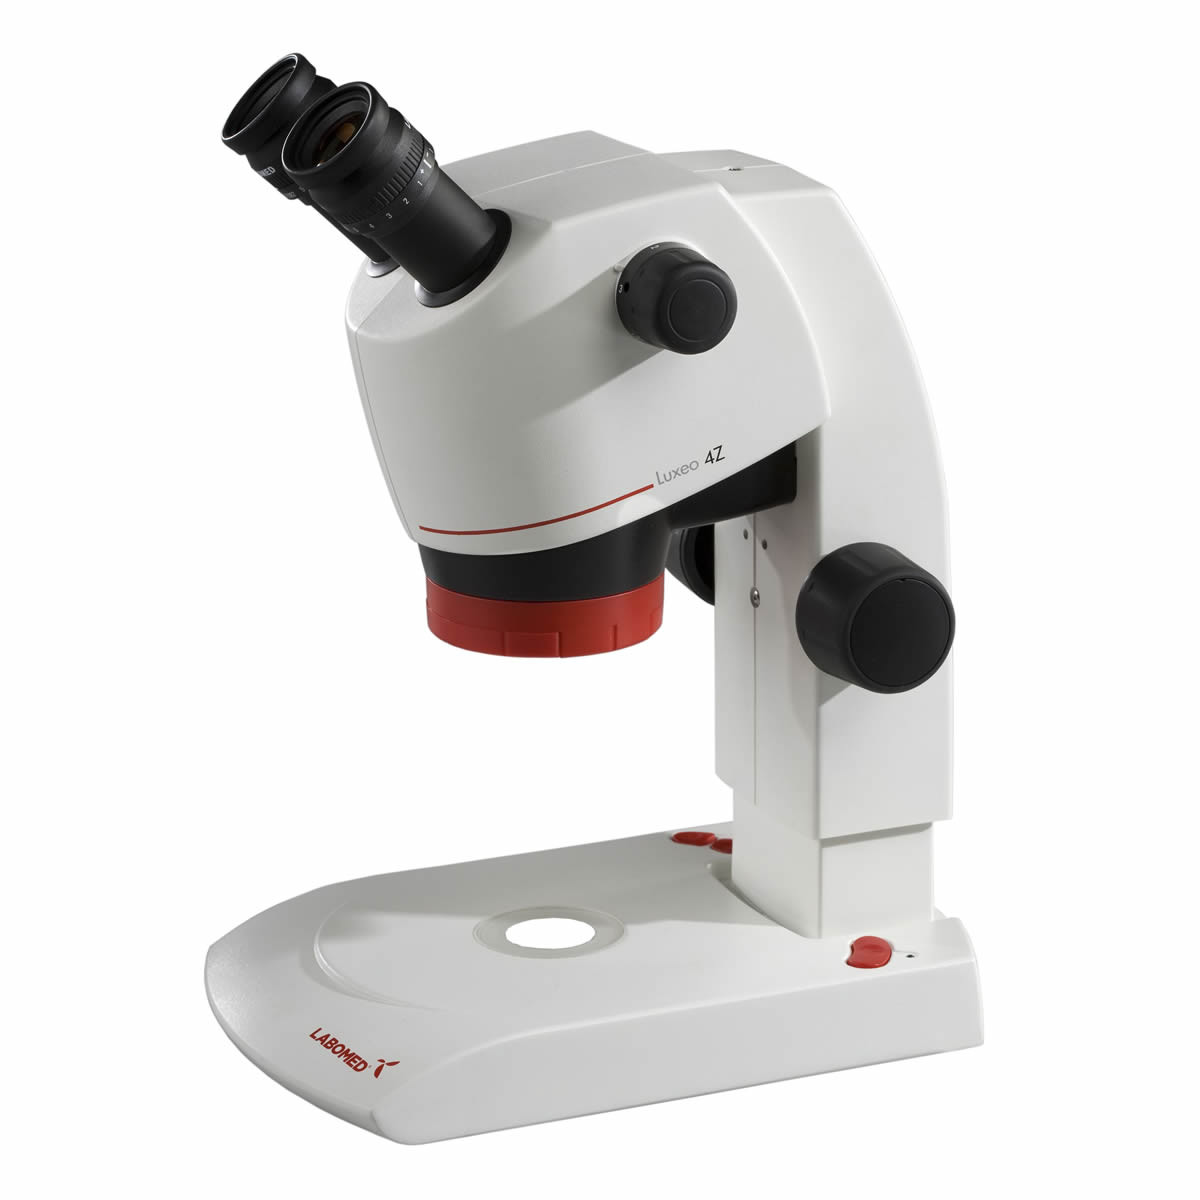 Labomed 4143000 Luxeo 4Z Trinocular Stereo Zoom Microscope, 8x - 35x  Magnification